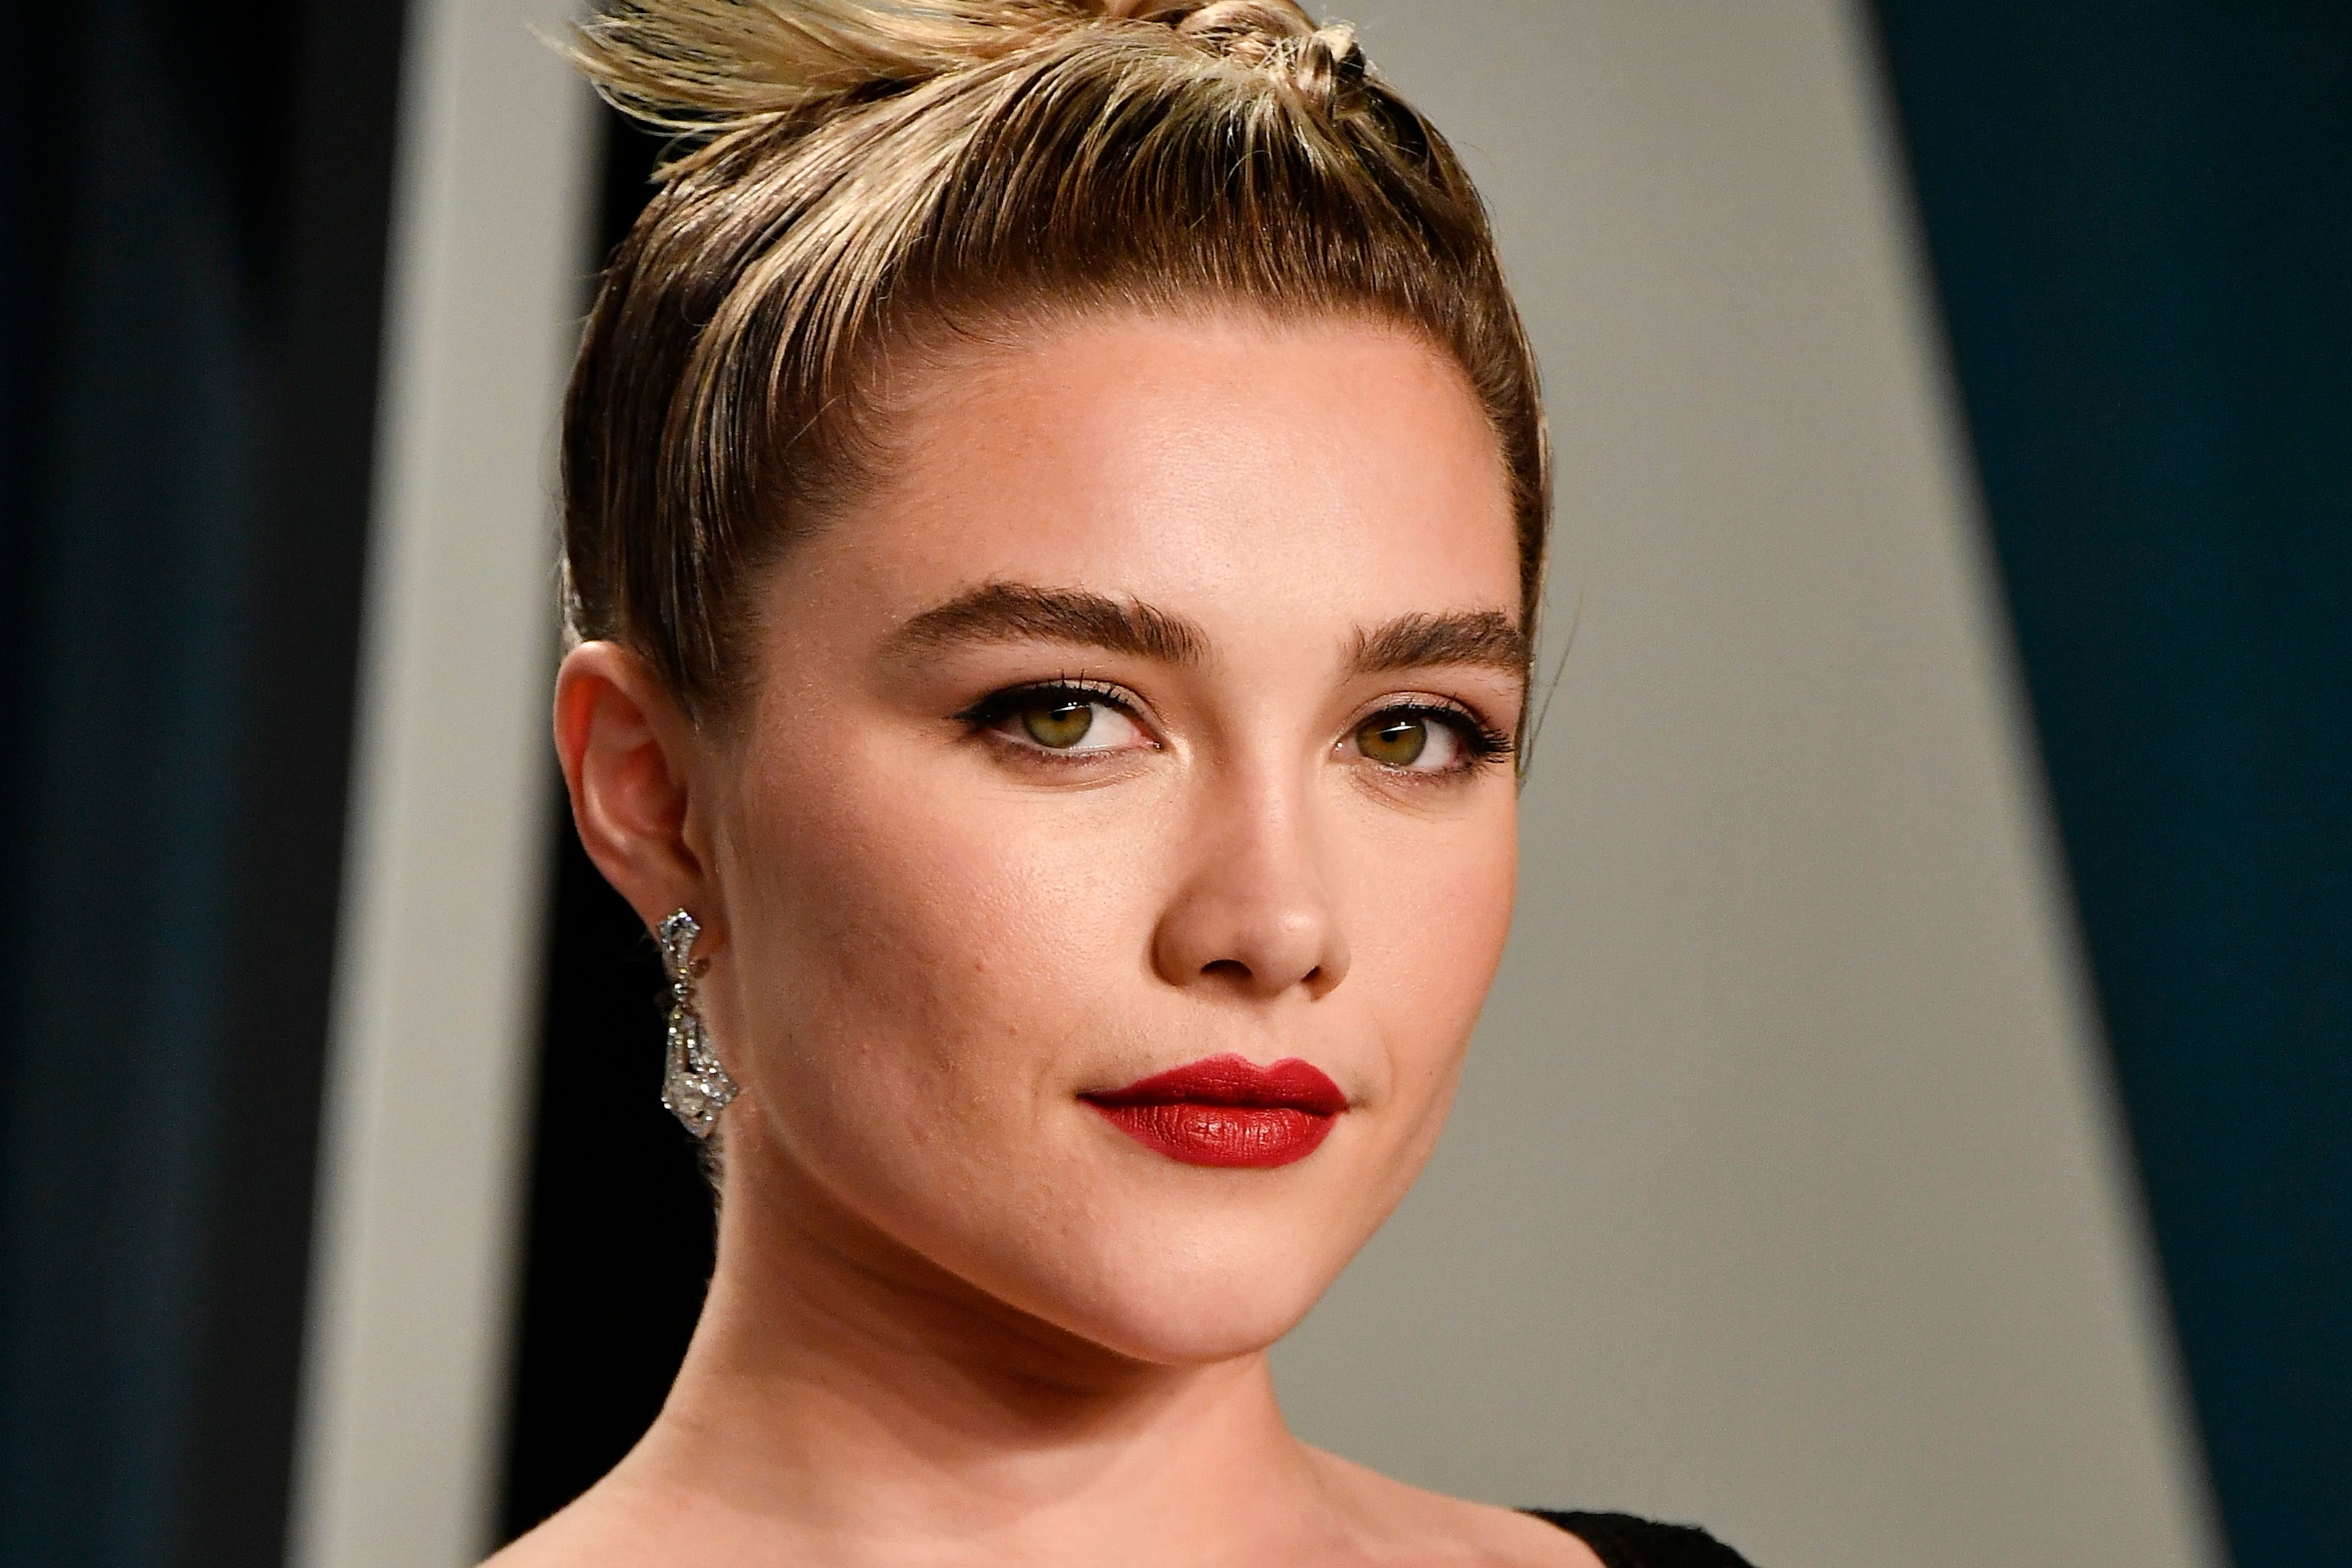 Florence Pugh 2018 Wallpapers